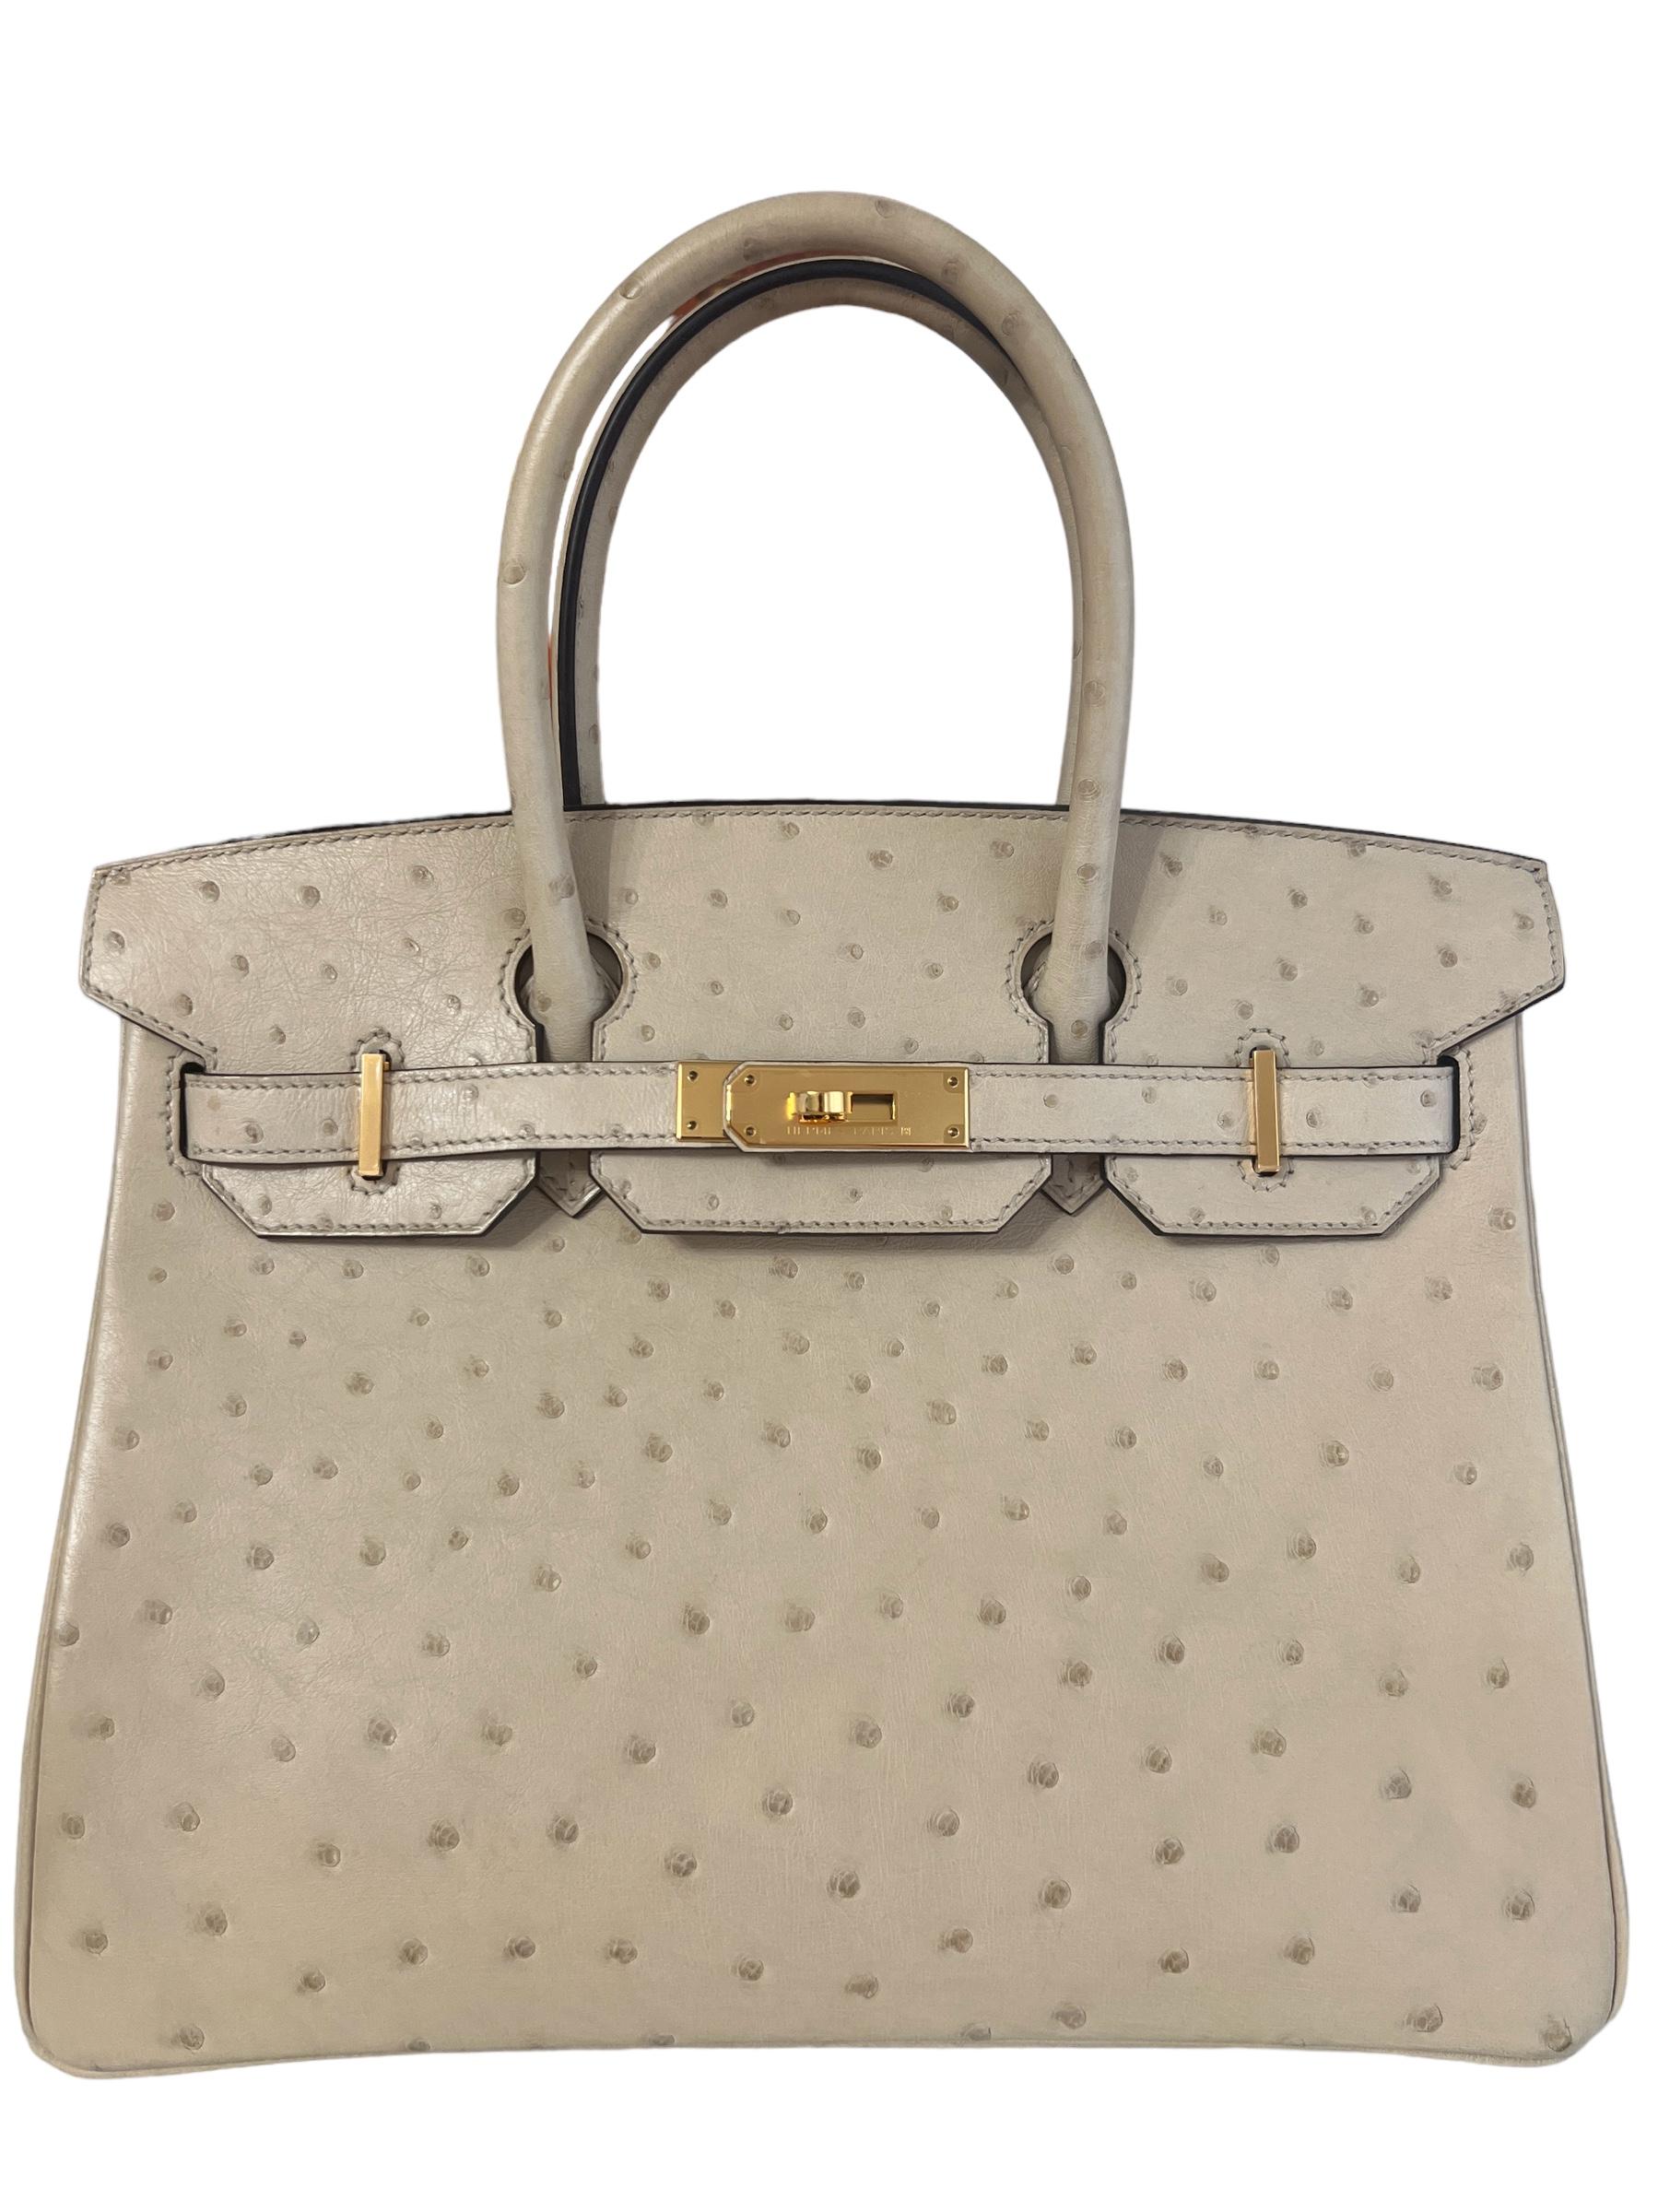 Stunning Rare Hermes Birkin 30 Trench Ostrich complimented by Gold Hardware. Pristine Condition Almost Like New Only worn a few times, with Plastic on all Hardware. 2020 Y Stamp. 

Shop with confidence from Lux Addicts. Authenticity